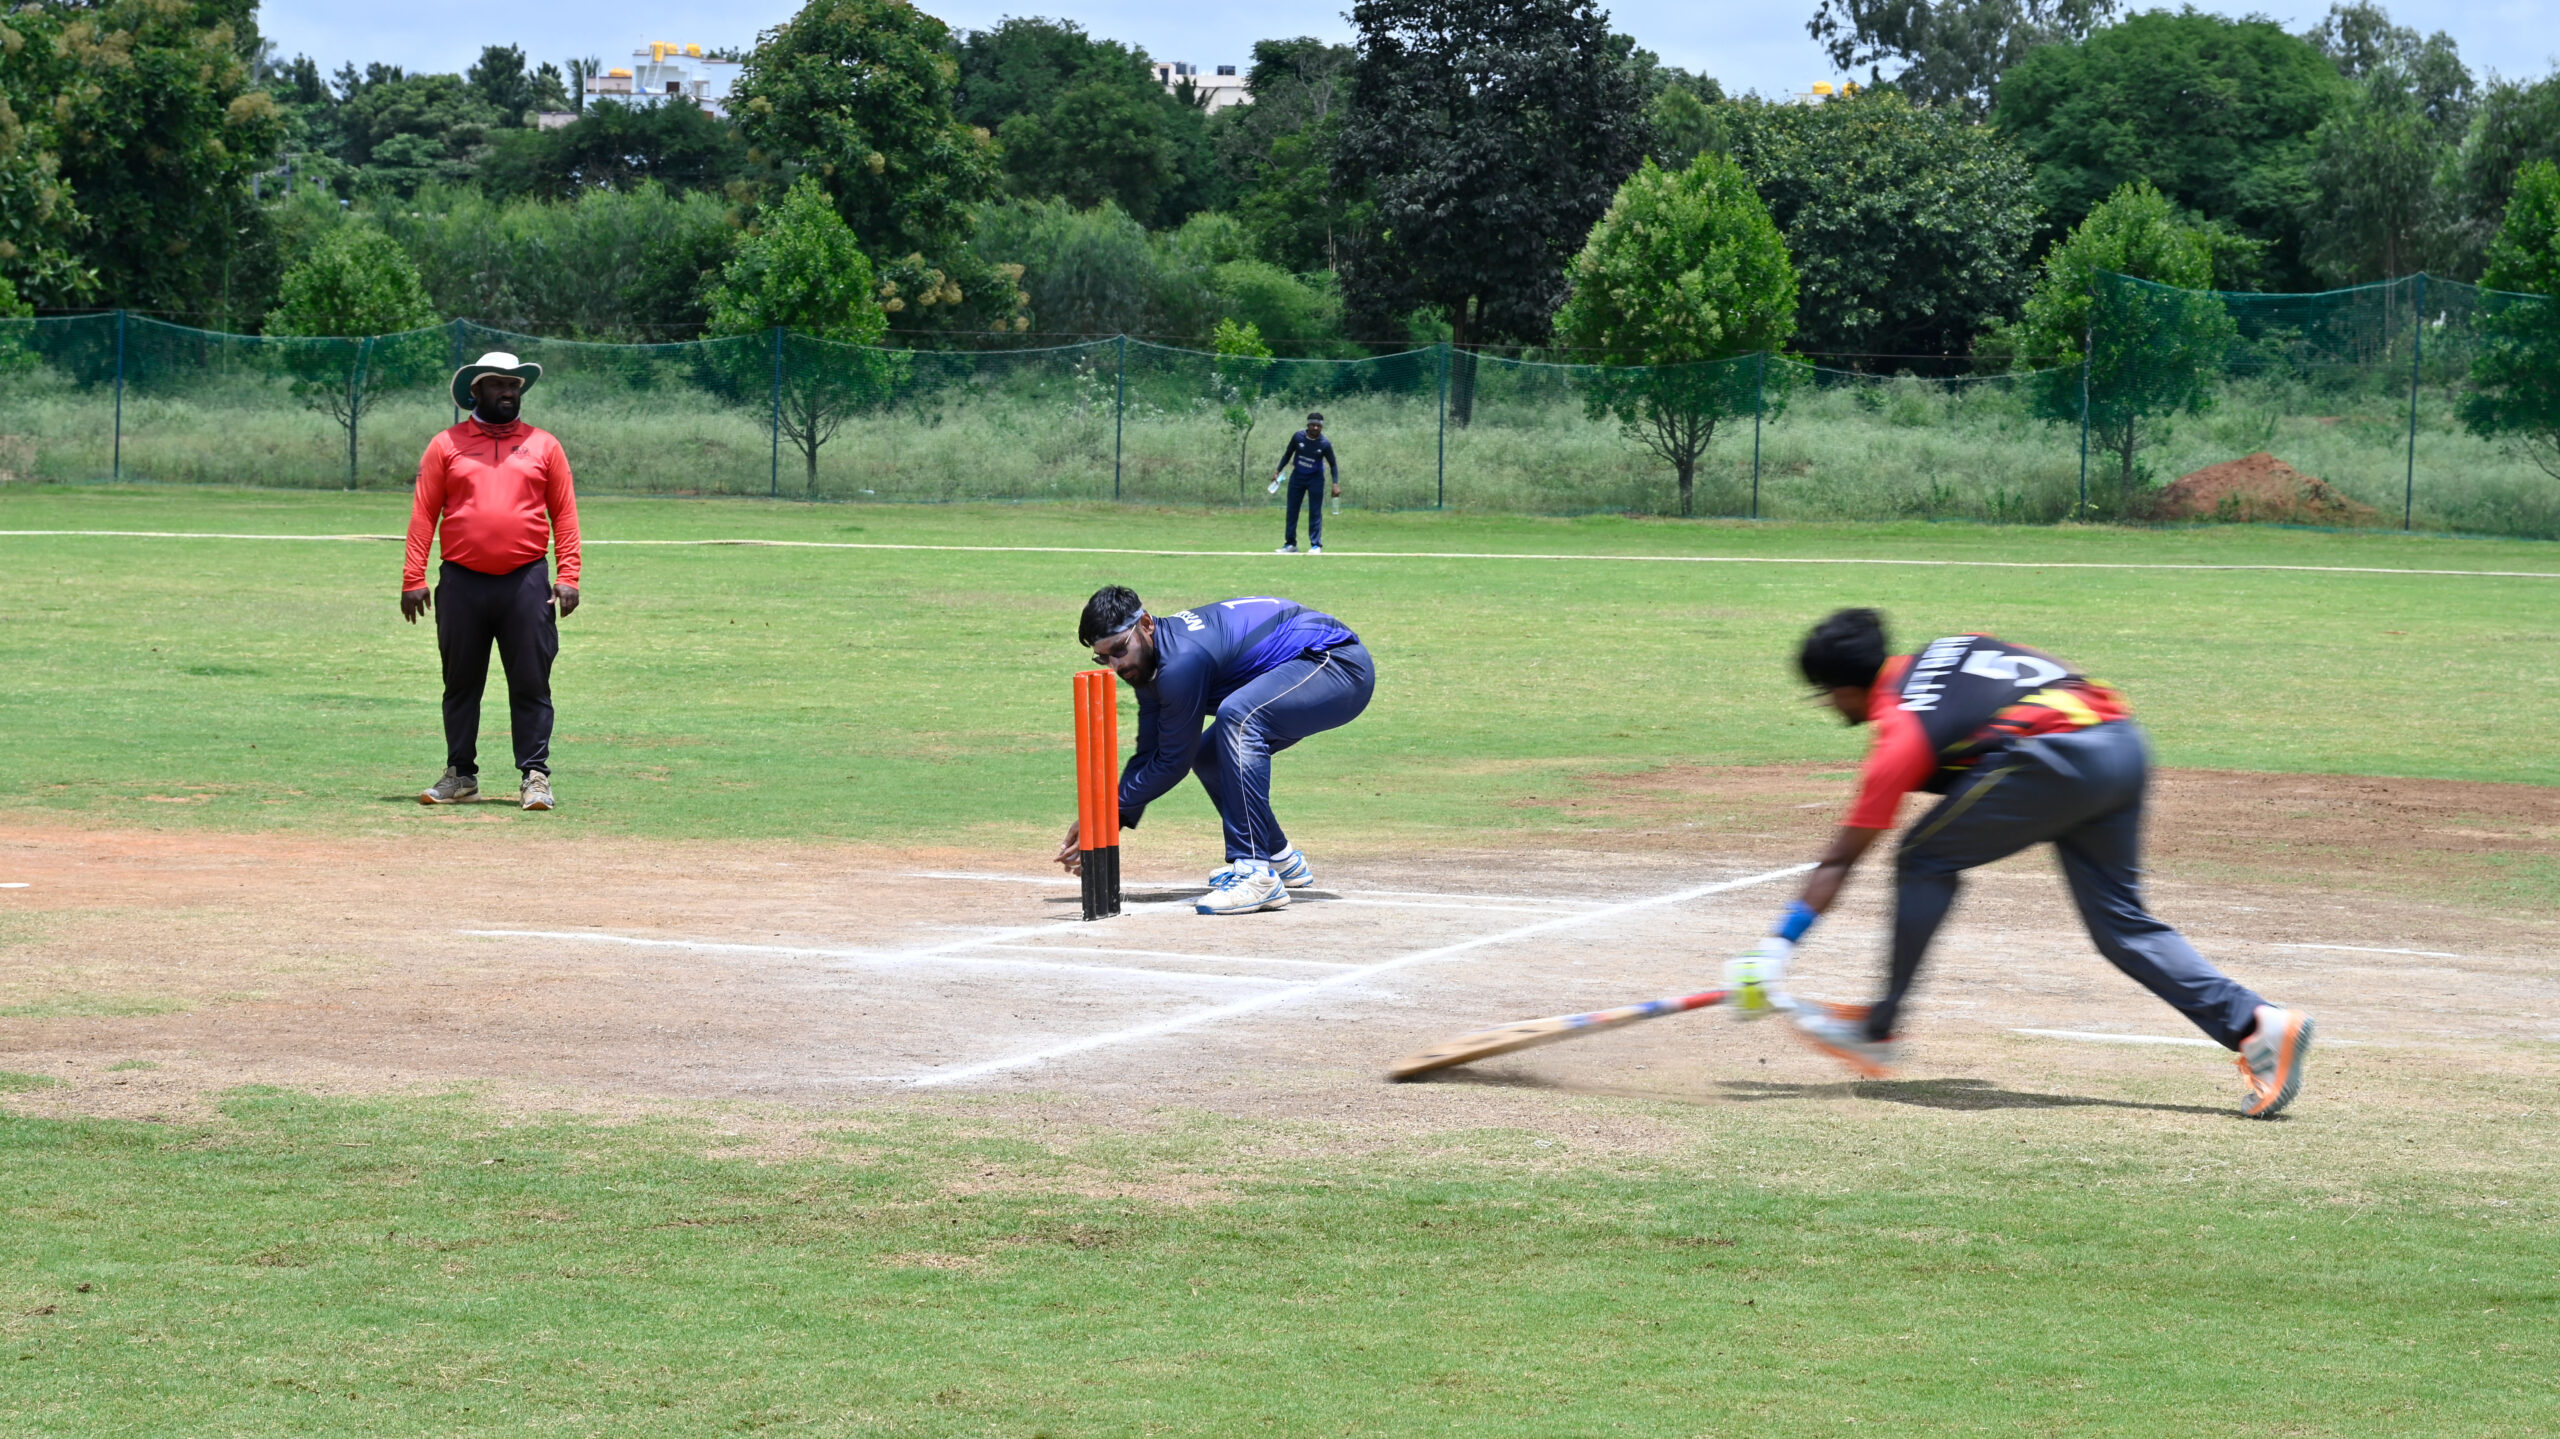 India Red won by 6 wickets in fourth match of NTT DATA T20 Champions Trophy for the Blind 2022